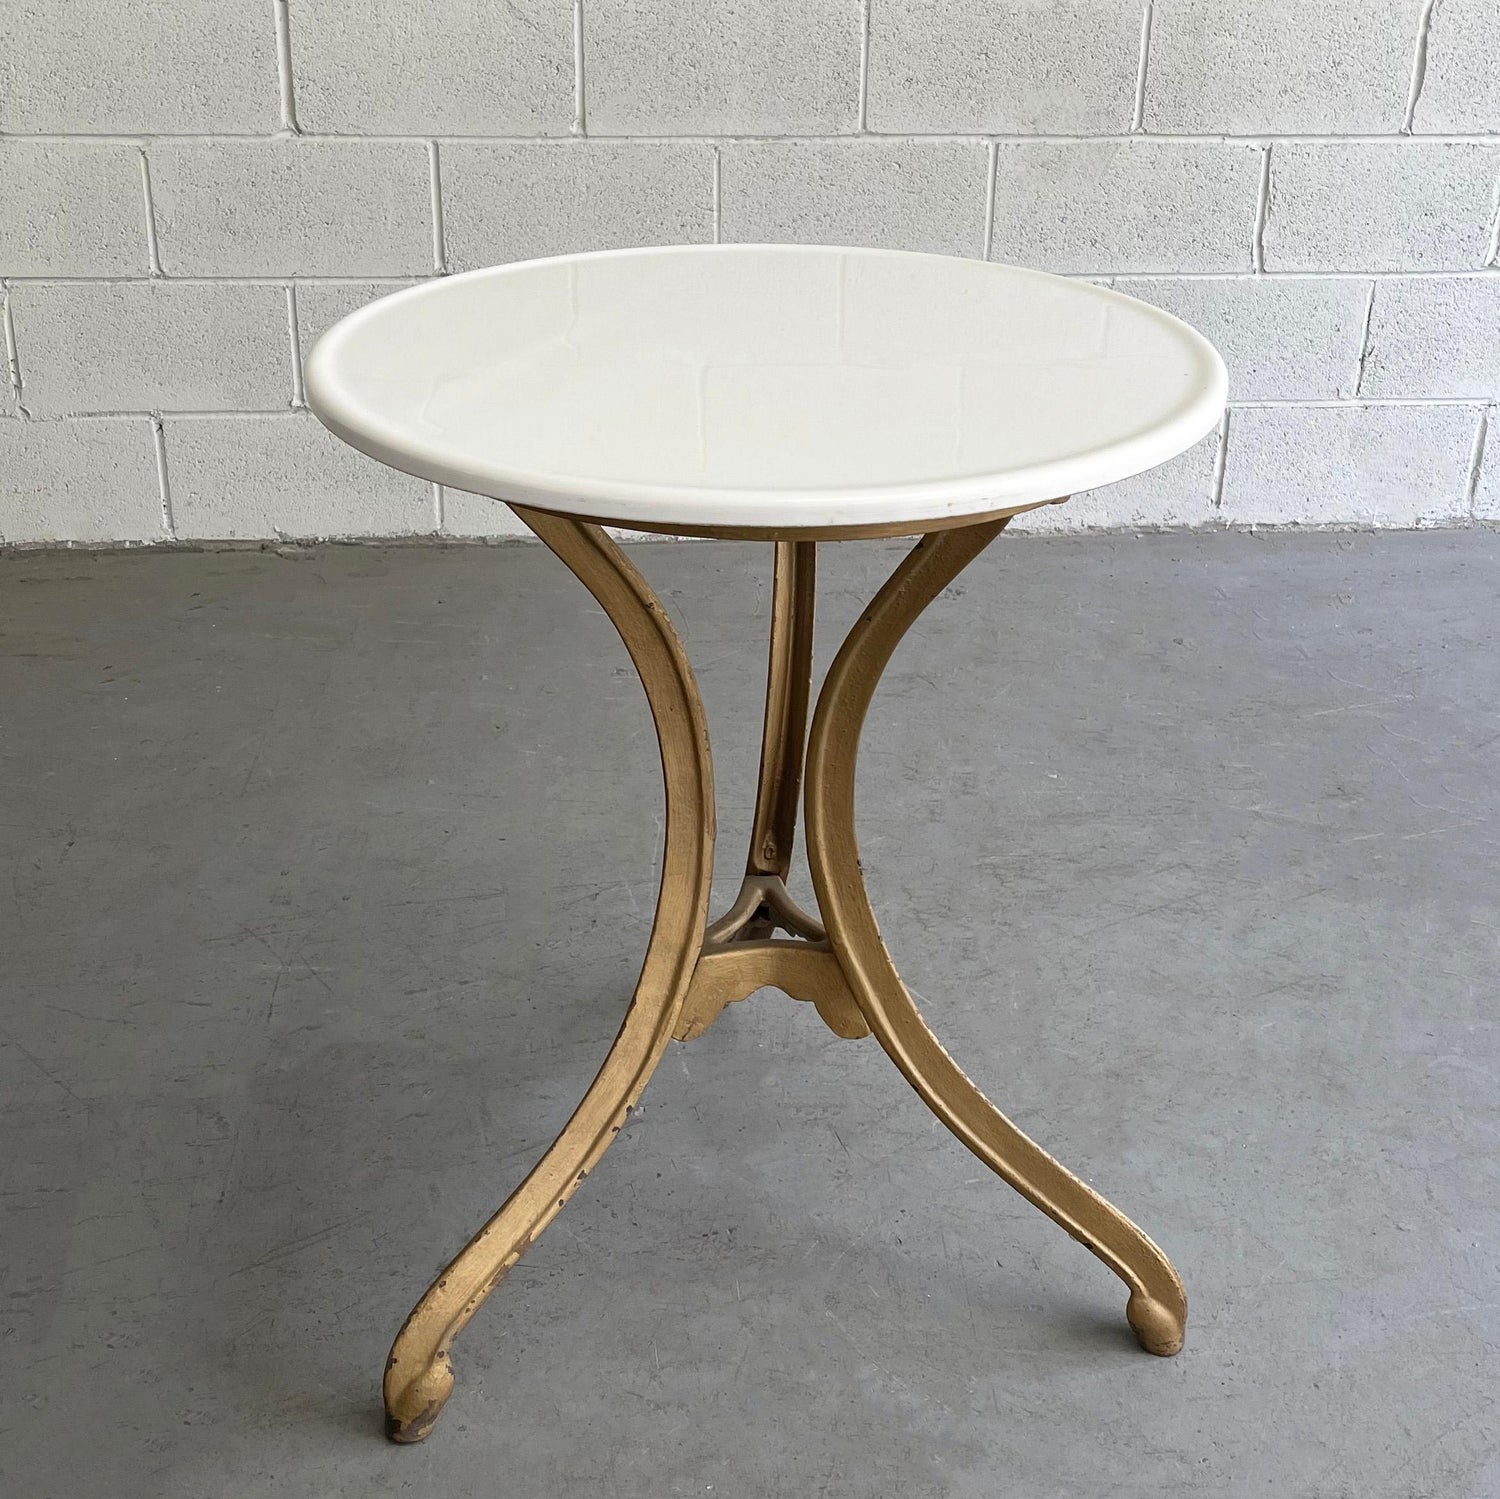 Early 20th Century Round Vitrolite Glass Café Table at 1stDibs